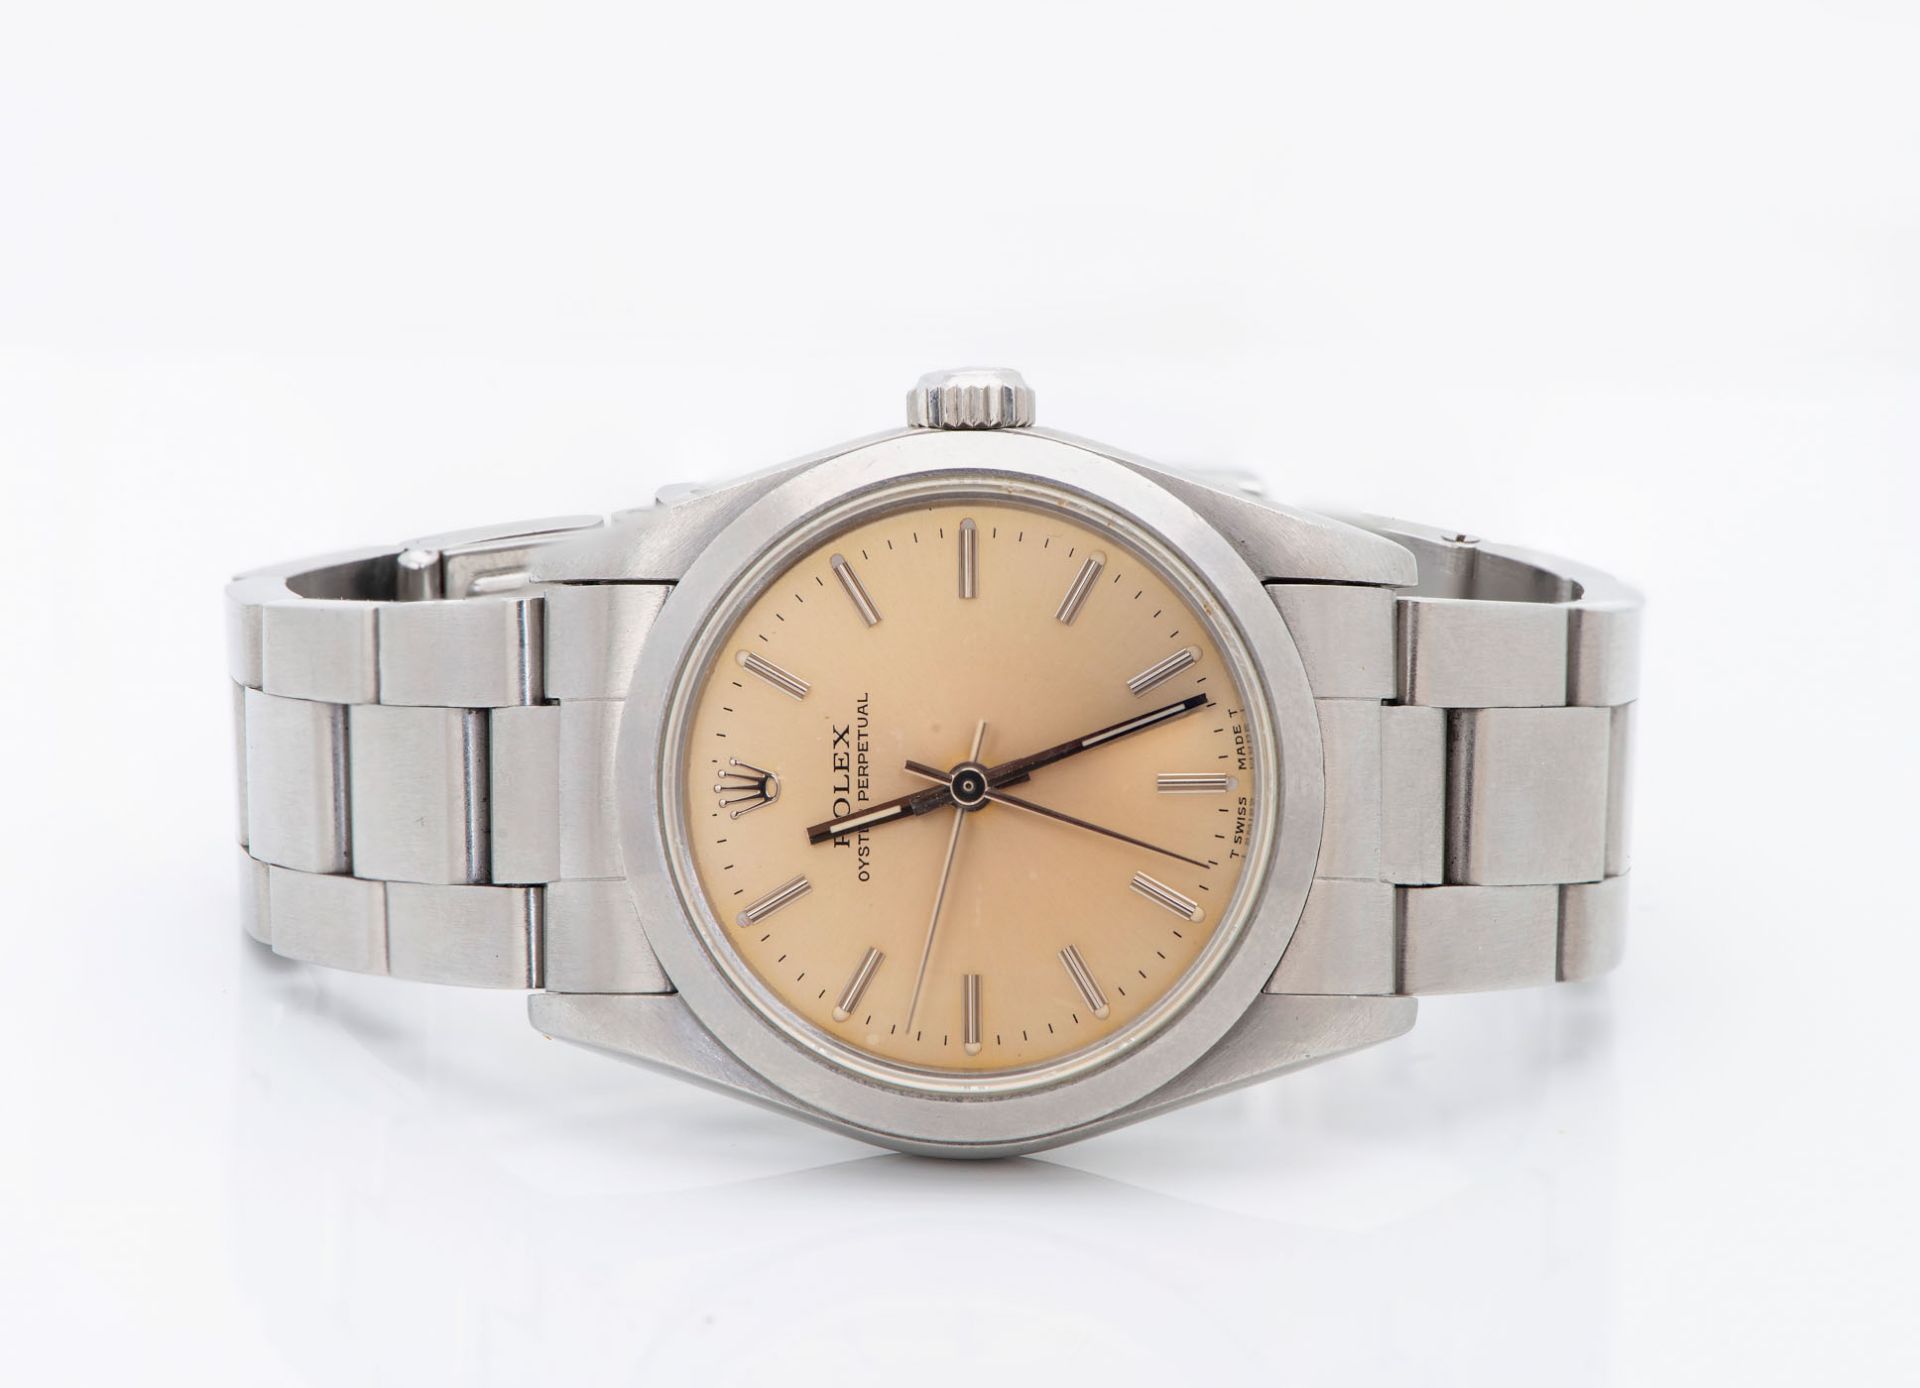 A Rolex Oyster Perpetual Wristwatch - Image 2 of 4